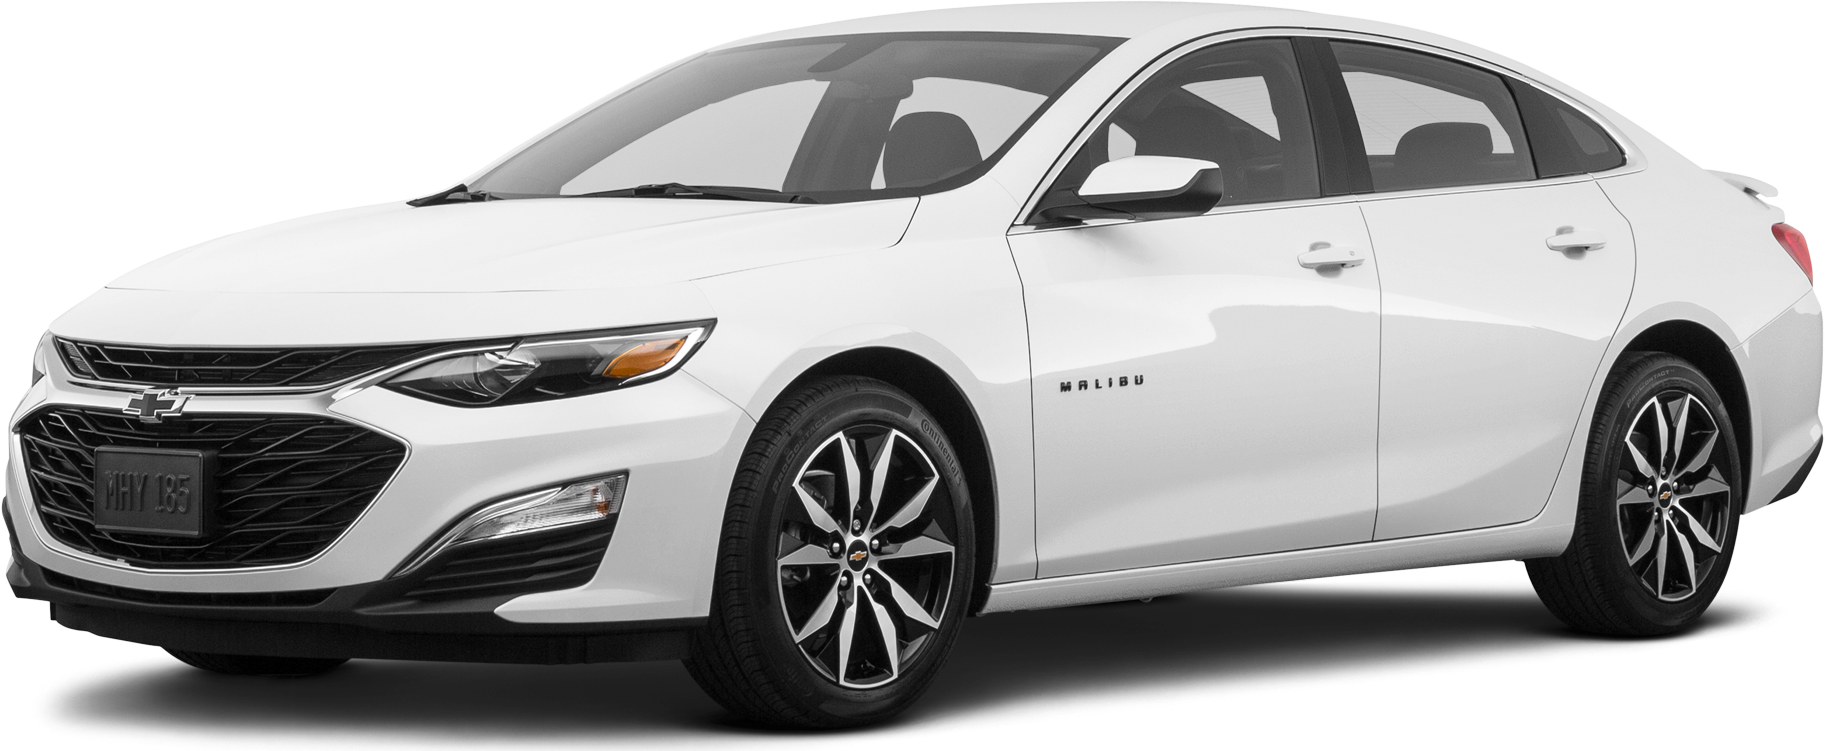 2024 Chevy Malibu Price, Pictures, Release Date & More | Kelley Blue Book